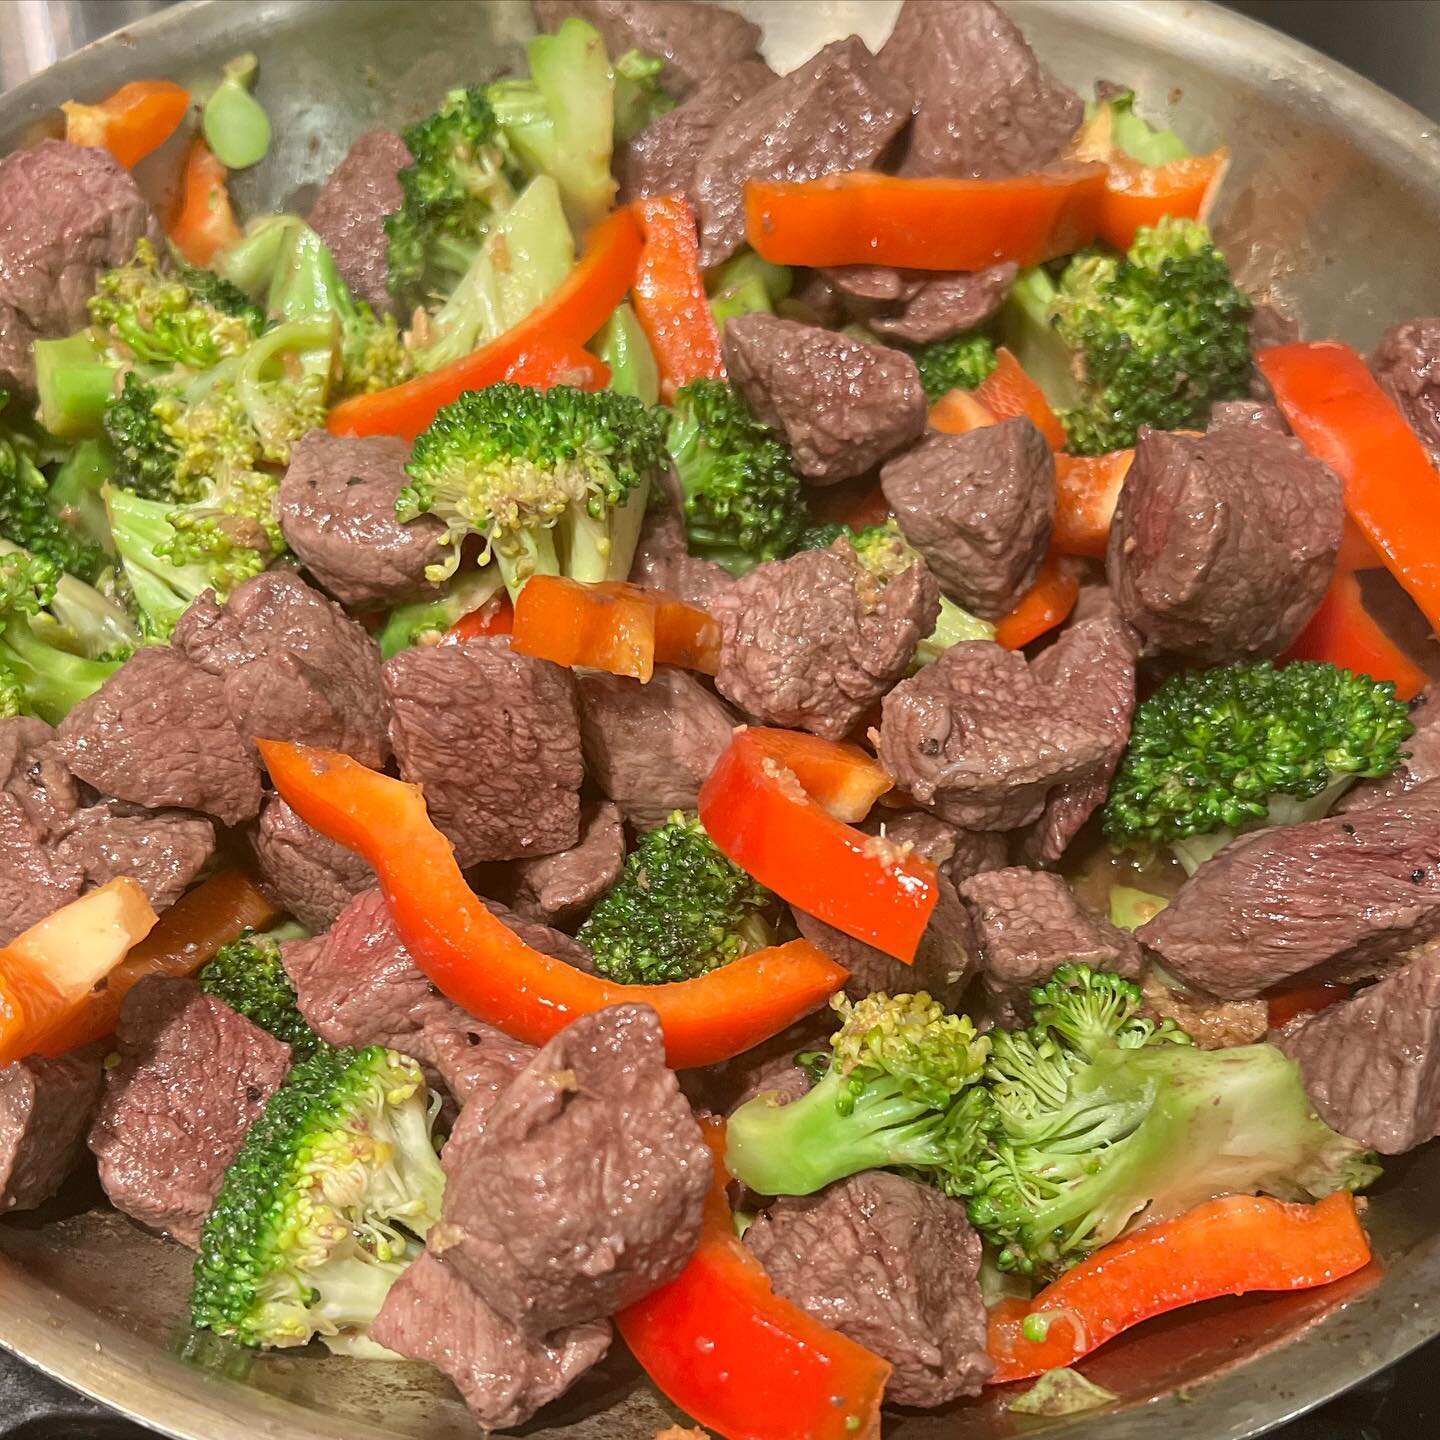 Ginger Beef and Broccoli Skillet!!! Yum!